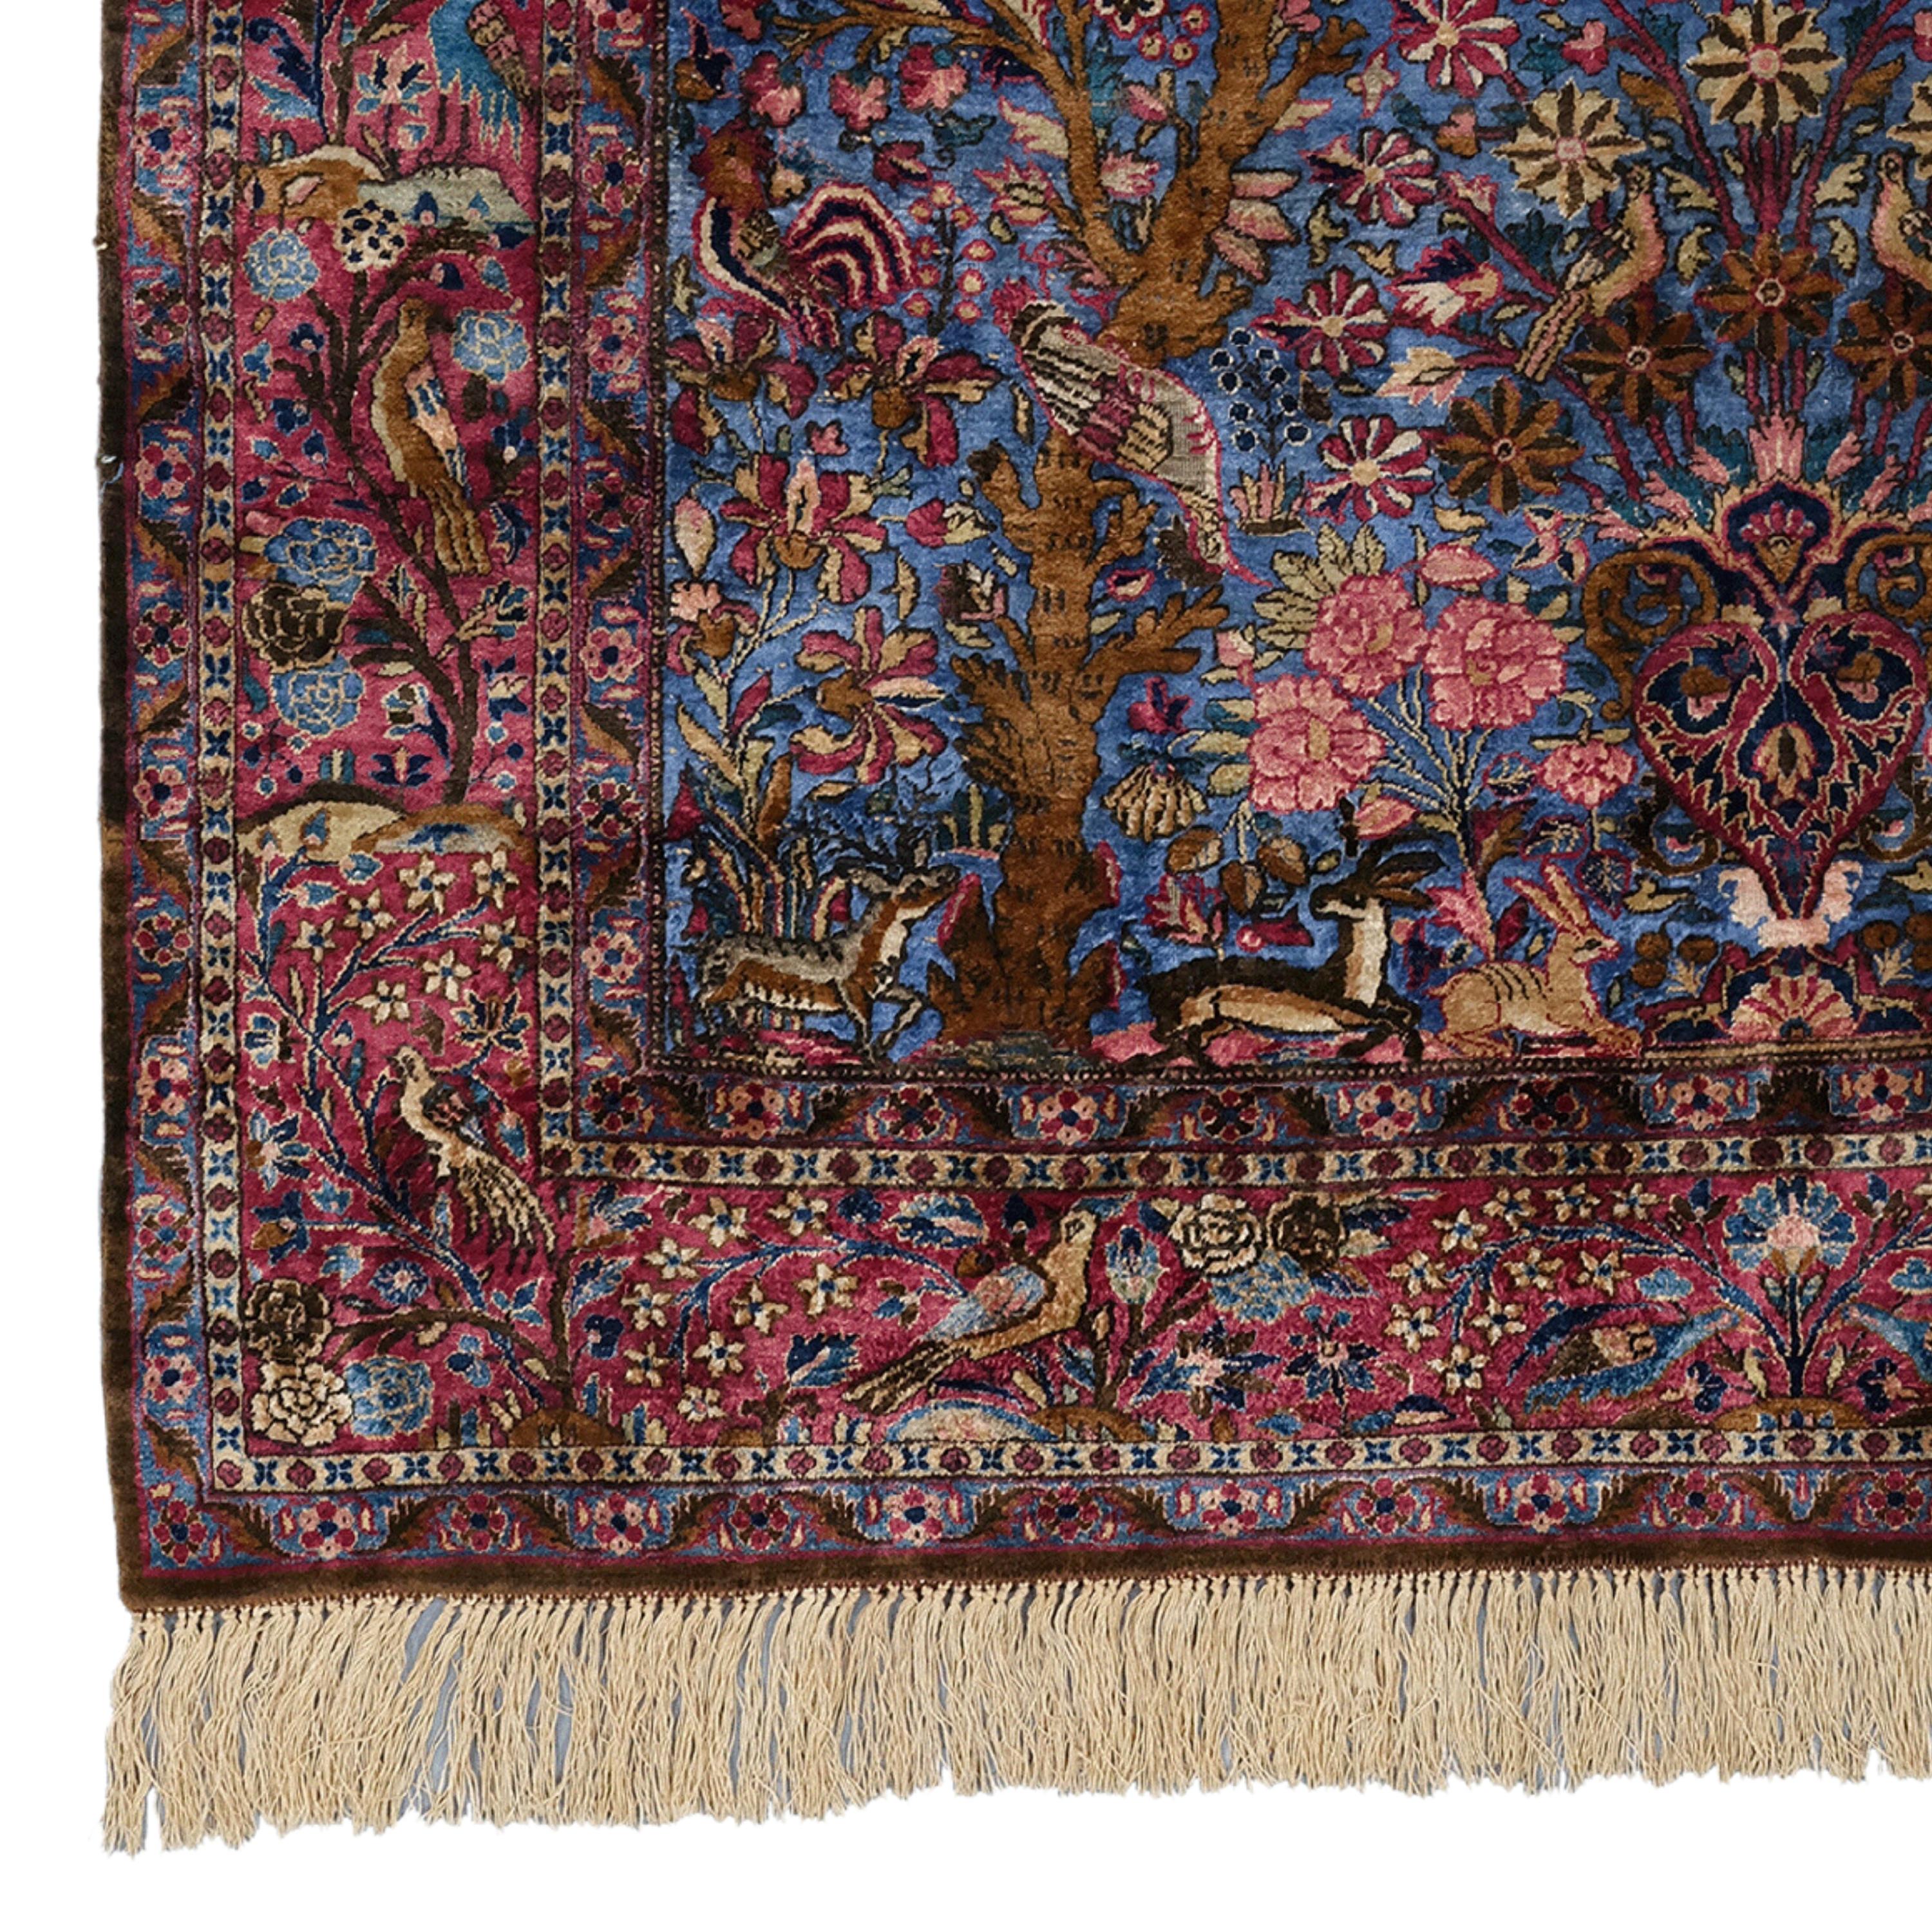 19th Century Silk Keshan Rug
Size: 128×200 cm

This impressive late 19th century Silk Keshan Carpet is a masterpiece reflecting the elegant and sophisticated craftsmanship of a historic period.

Rich Patterns: The carpet is decorated with intricate